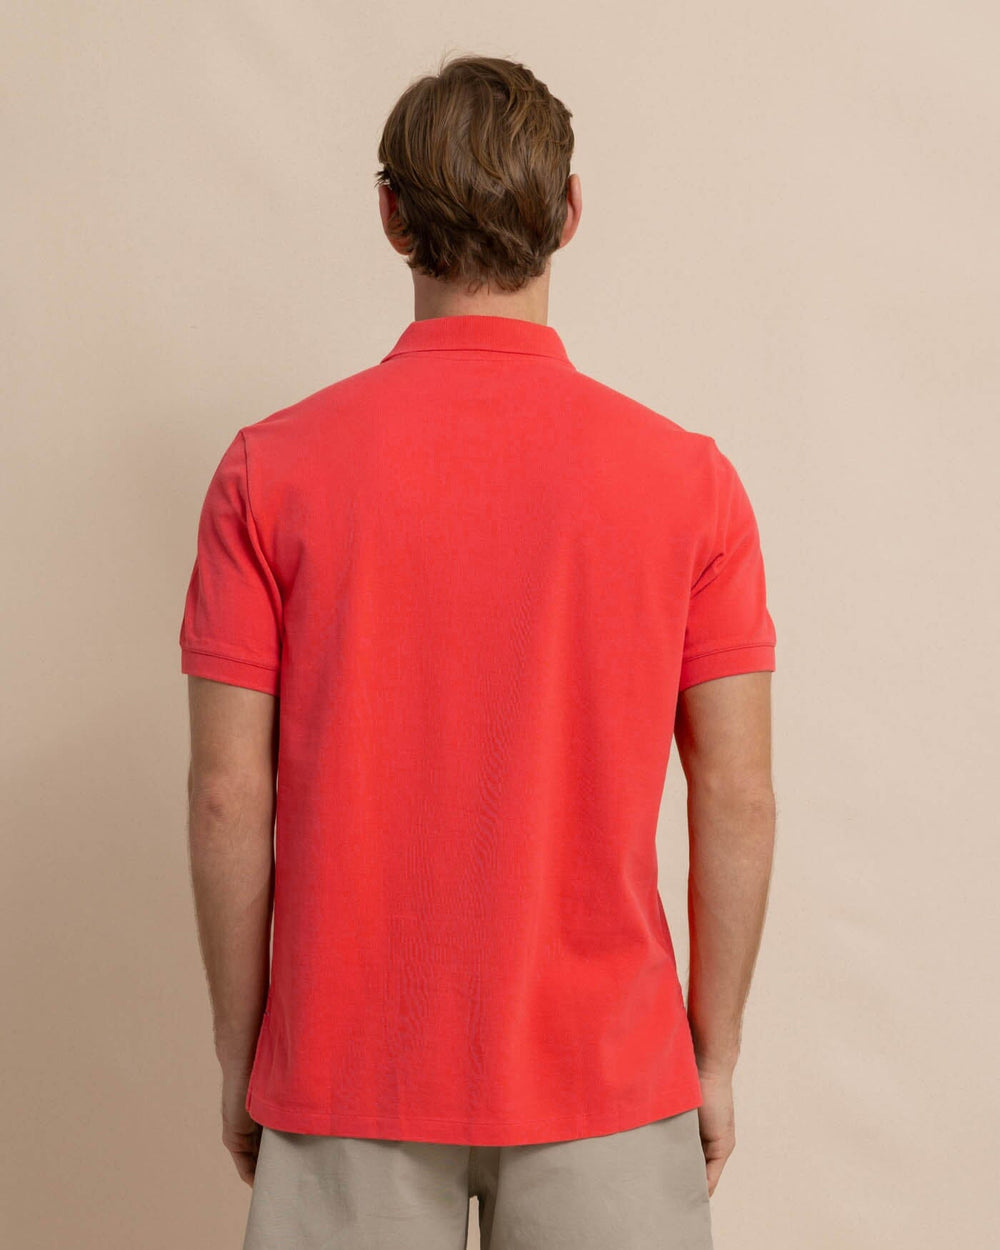 The back view of the Southern Tide new-skipjack-polo-shirt by Southern Tide - Paprika Red